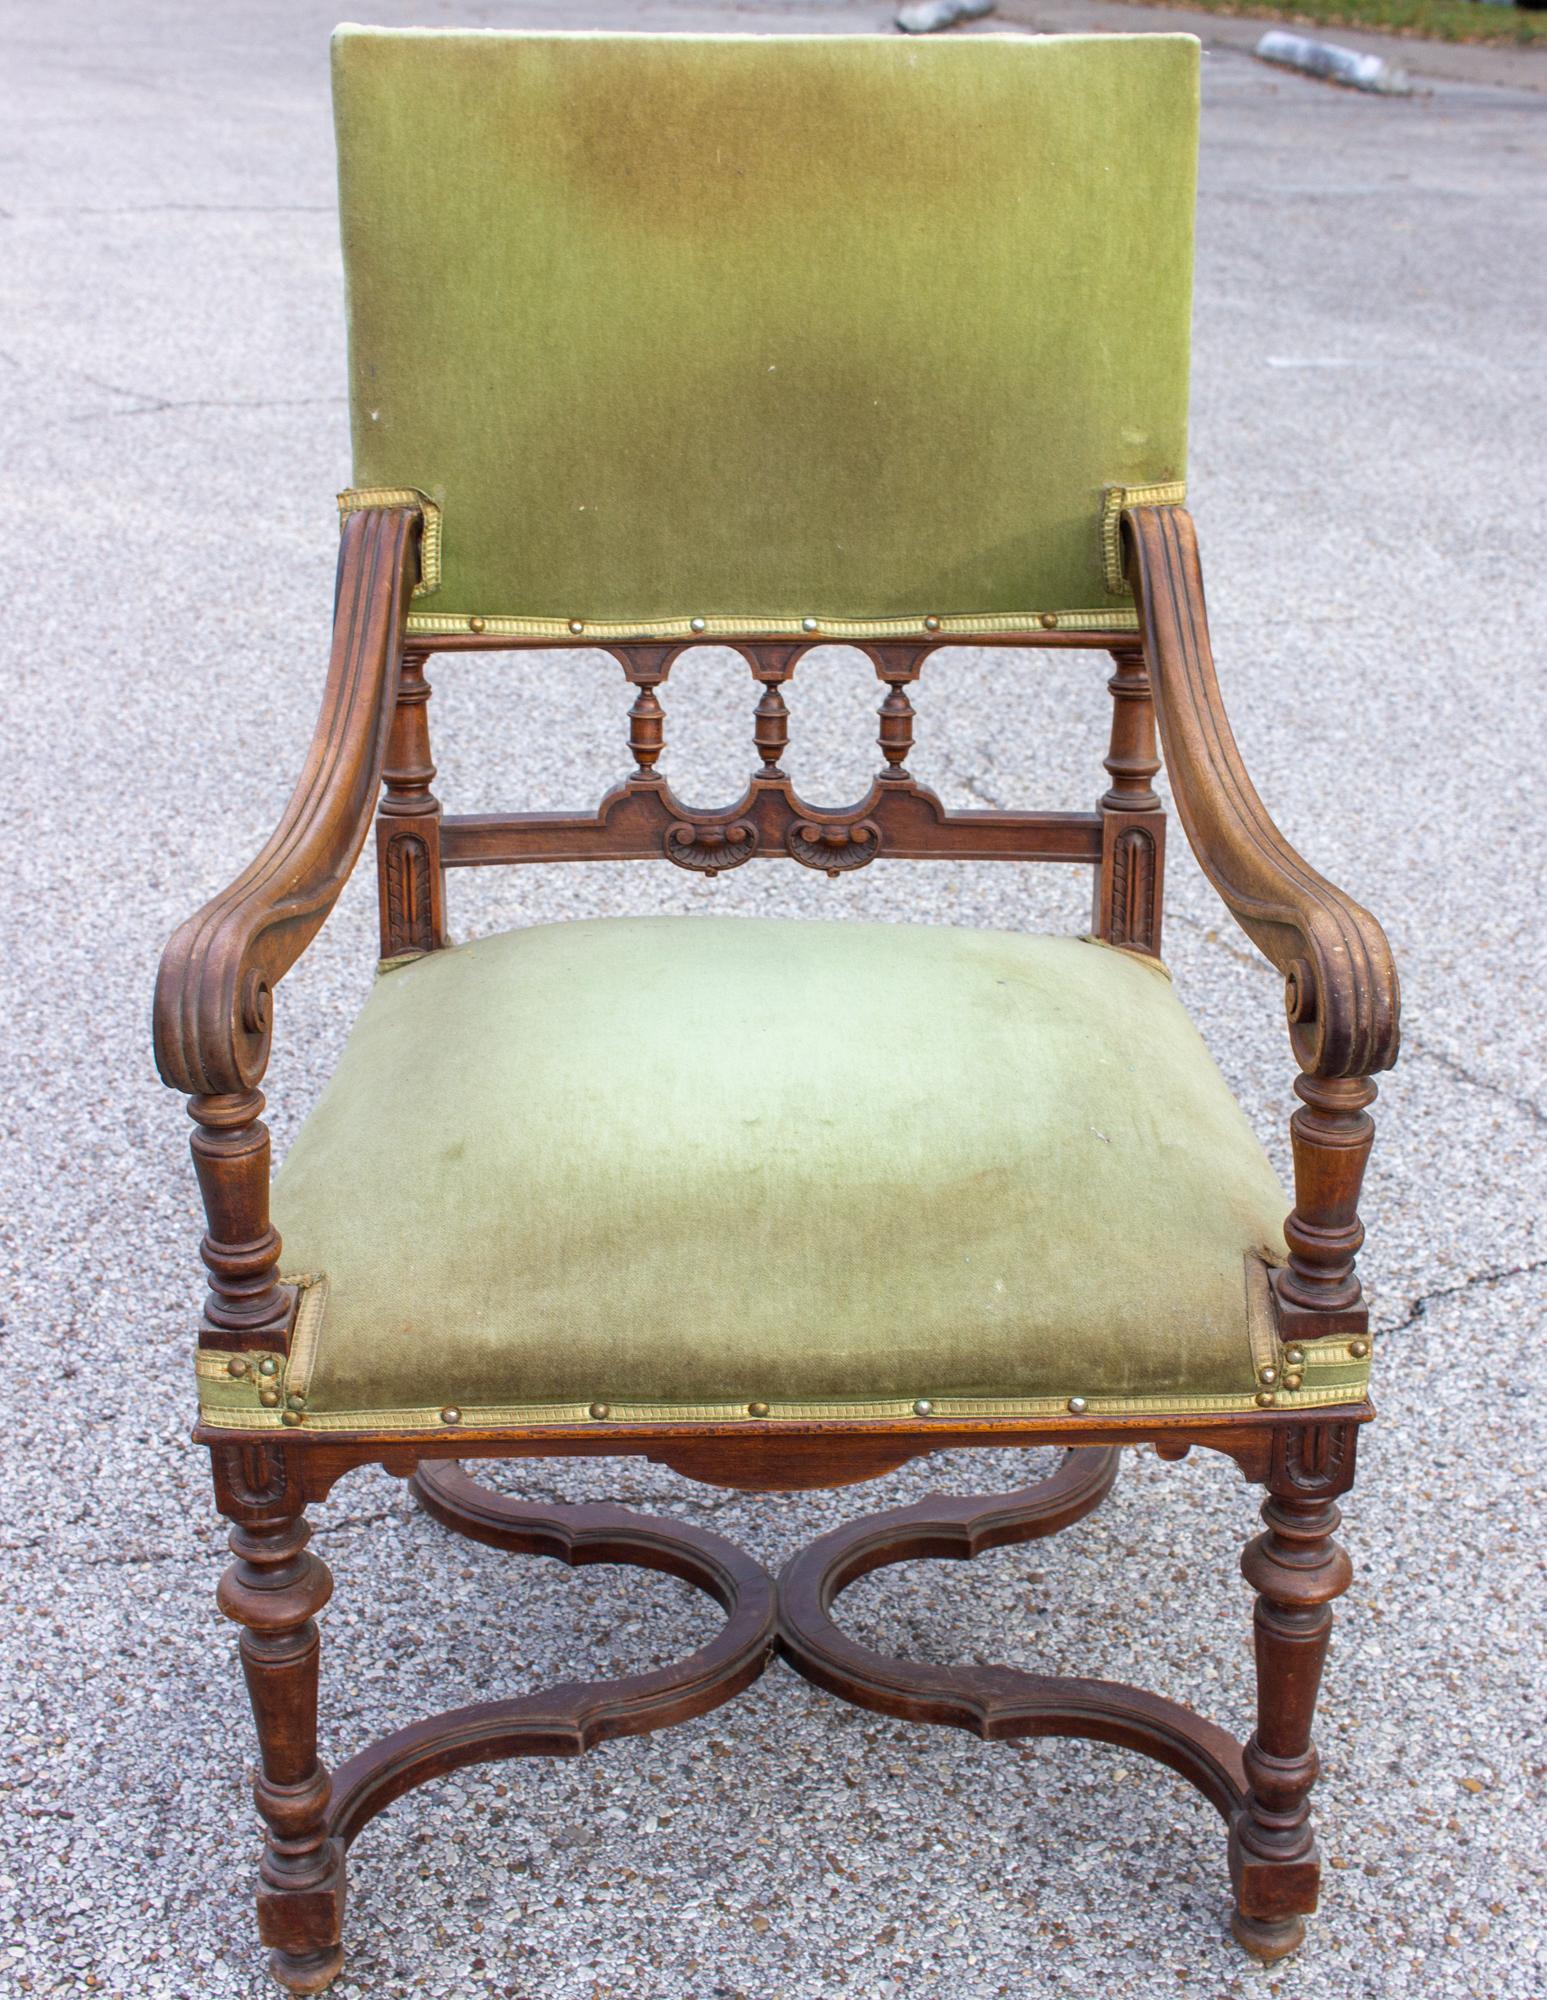 This generously sized antique French carved wood armchair features faded green velvet upholstery and various turned details the arms, legs and back. The arms gently curve down and forward, ending in a scrolled detail. The x-style base is beautifully